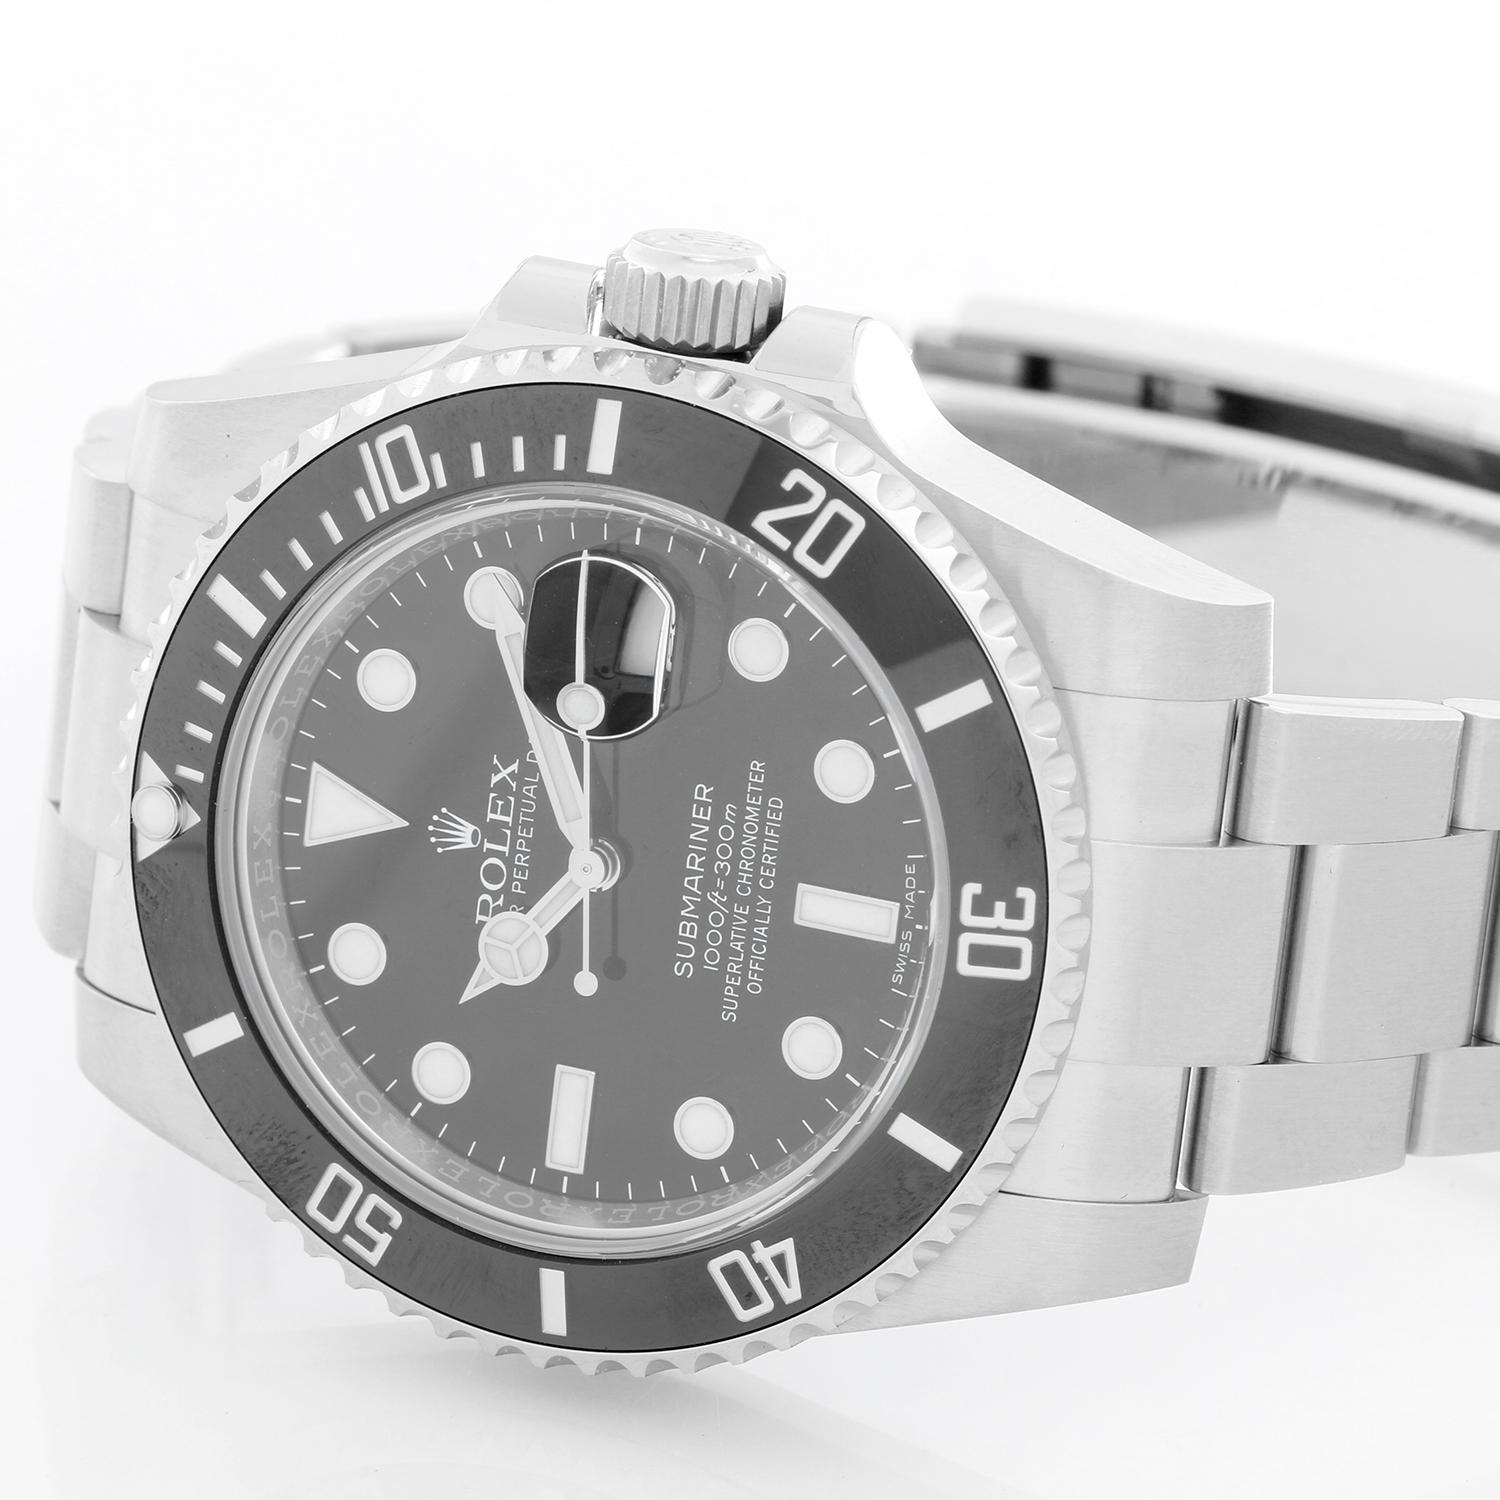 Rolex Submariner Men's Stainless Steel Watch 116610 LN - Automatic winding, 31 jewels, pressure proof to 1,000 feet. Stainless steel case with time-lapse Cerachrom bezel . Black dial with luminous markers; date at 3 o'clock. Stainless steel and